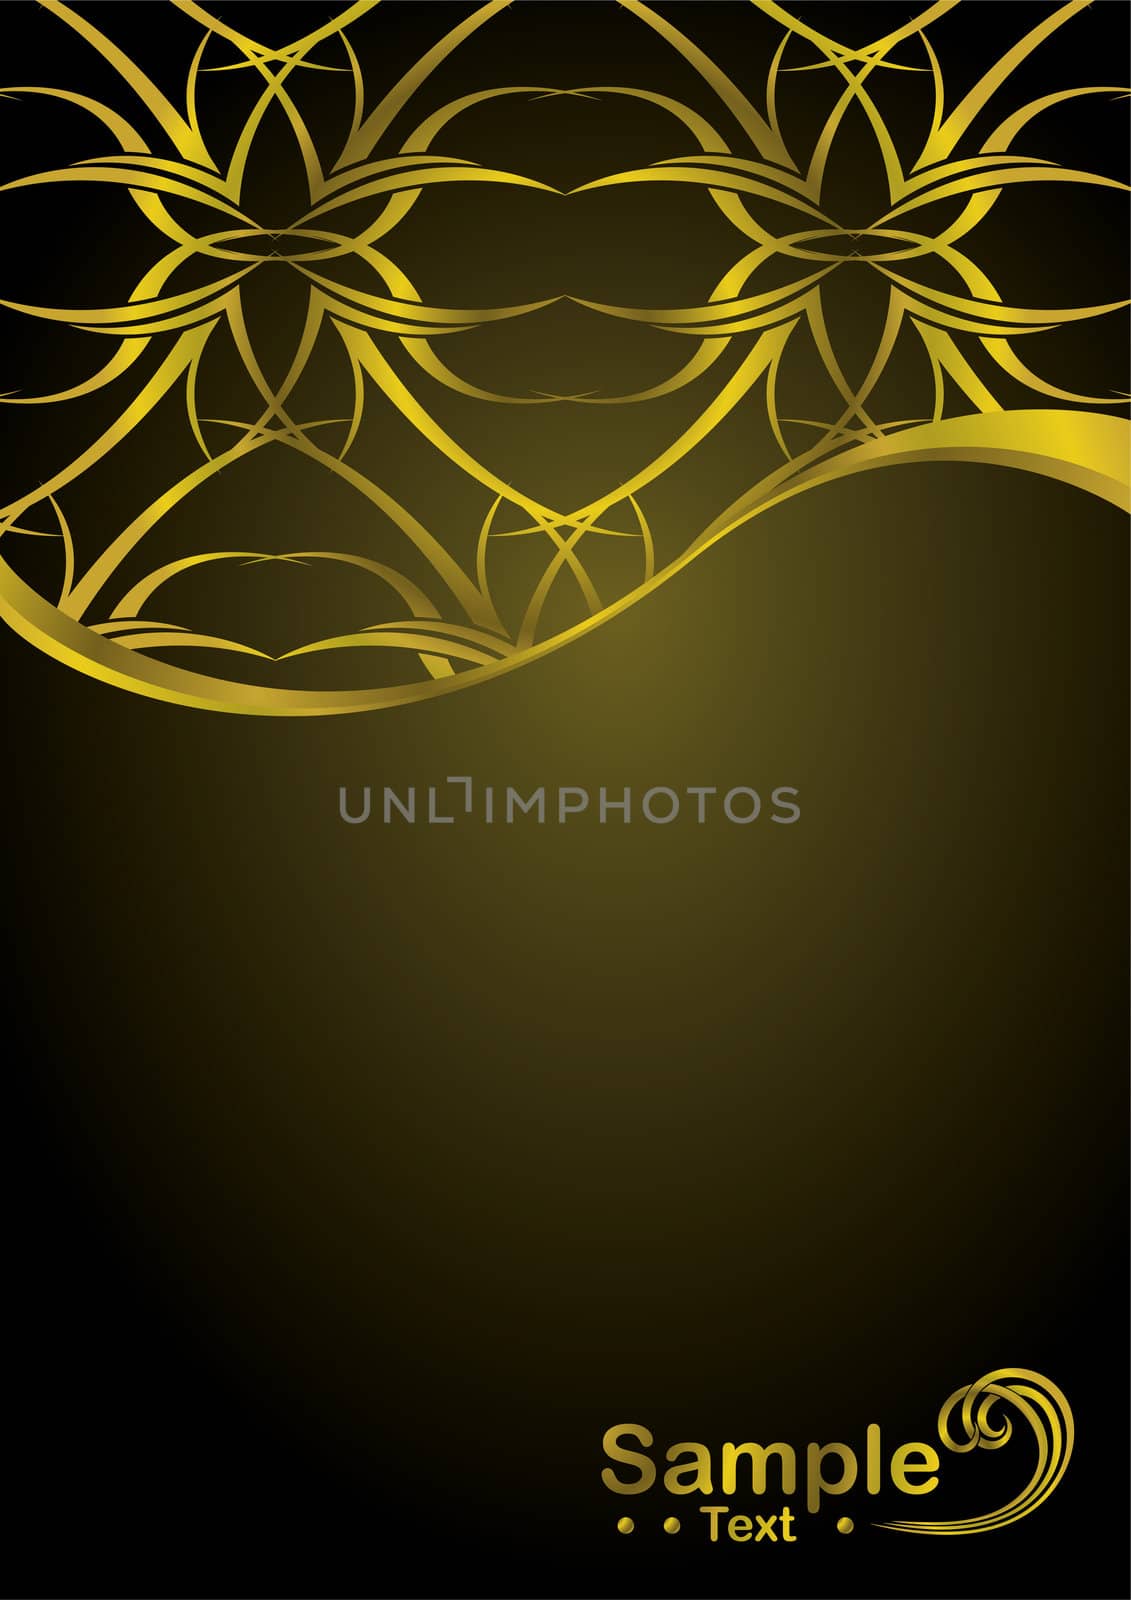 Gold and black background design with copy space and tattoo element